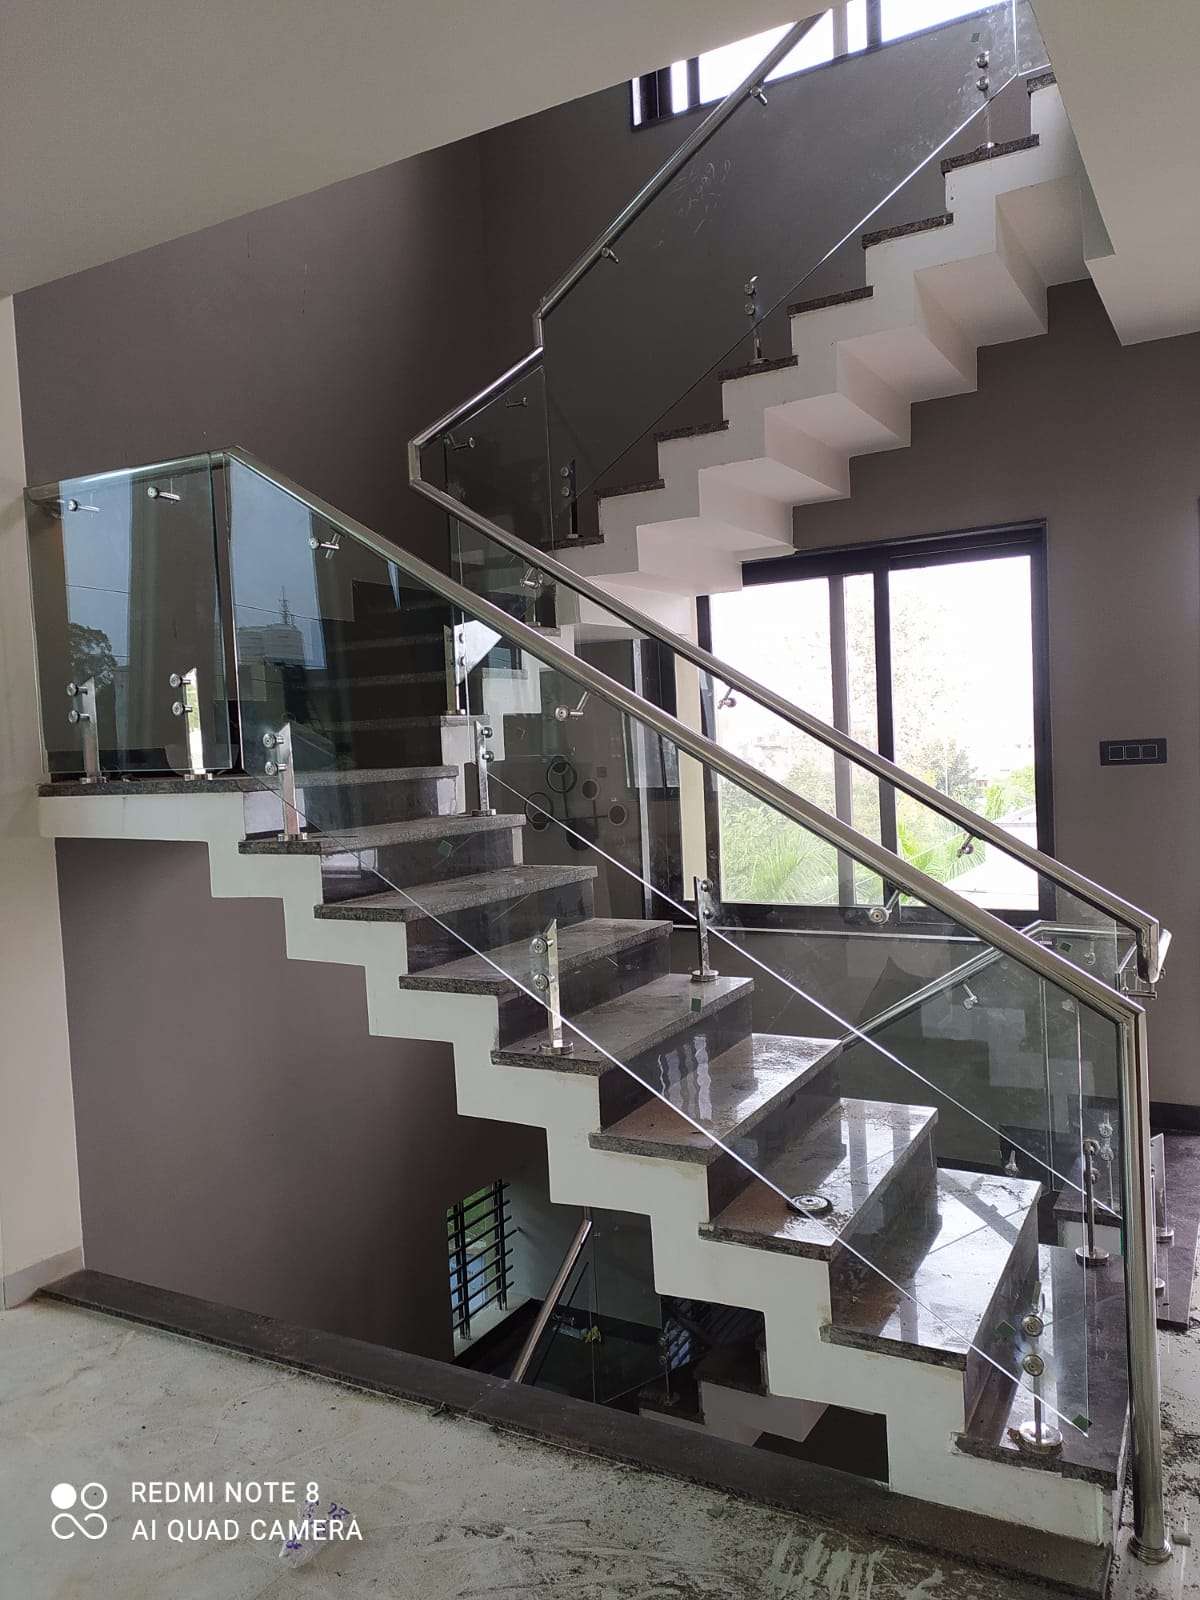 stair relling 
Contact me-7693066707
ER. Sameer mansuri
Interior Exteriar include all working 
(construction, design, dwaring, tile, eletricity, plumbing, Alluminium all type, Febrication all type, Paint all type, wallpapers, etc.)
 #StaircaseDecors  #GlassHandRailStaircase #LShapedStaircase #StraightStaircase  #StaircasePaintings #StaircaseIdeas  #CurvedStaircase